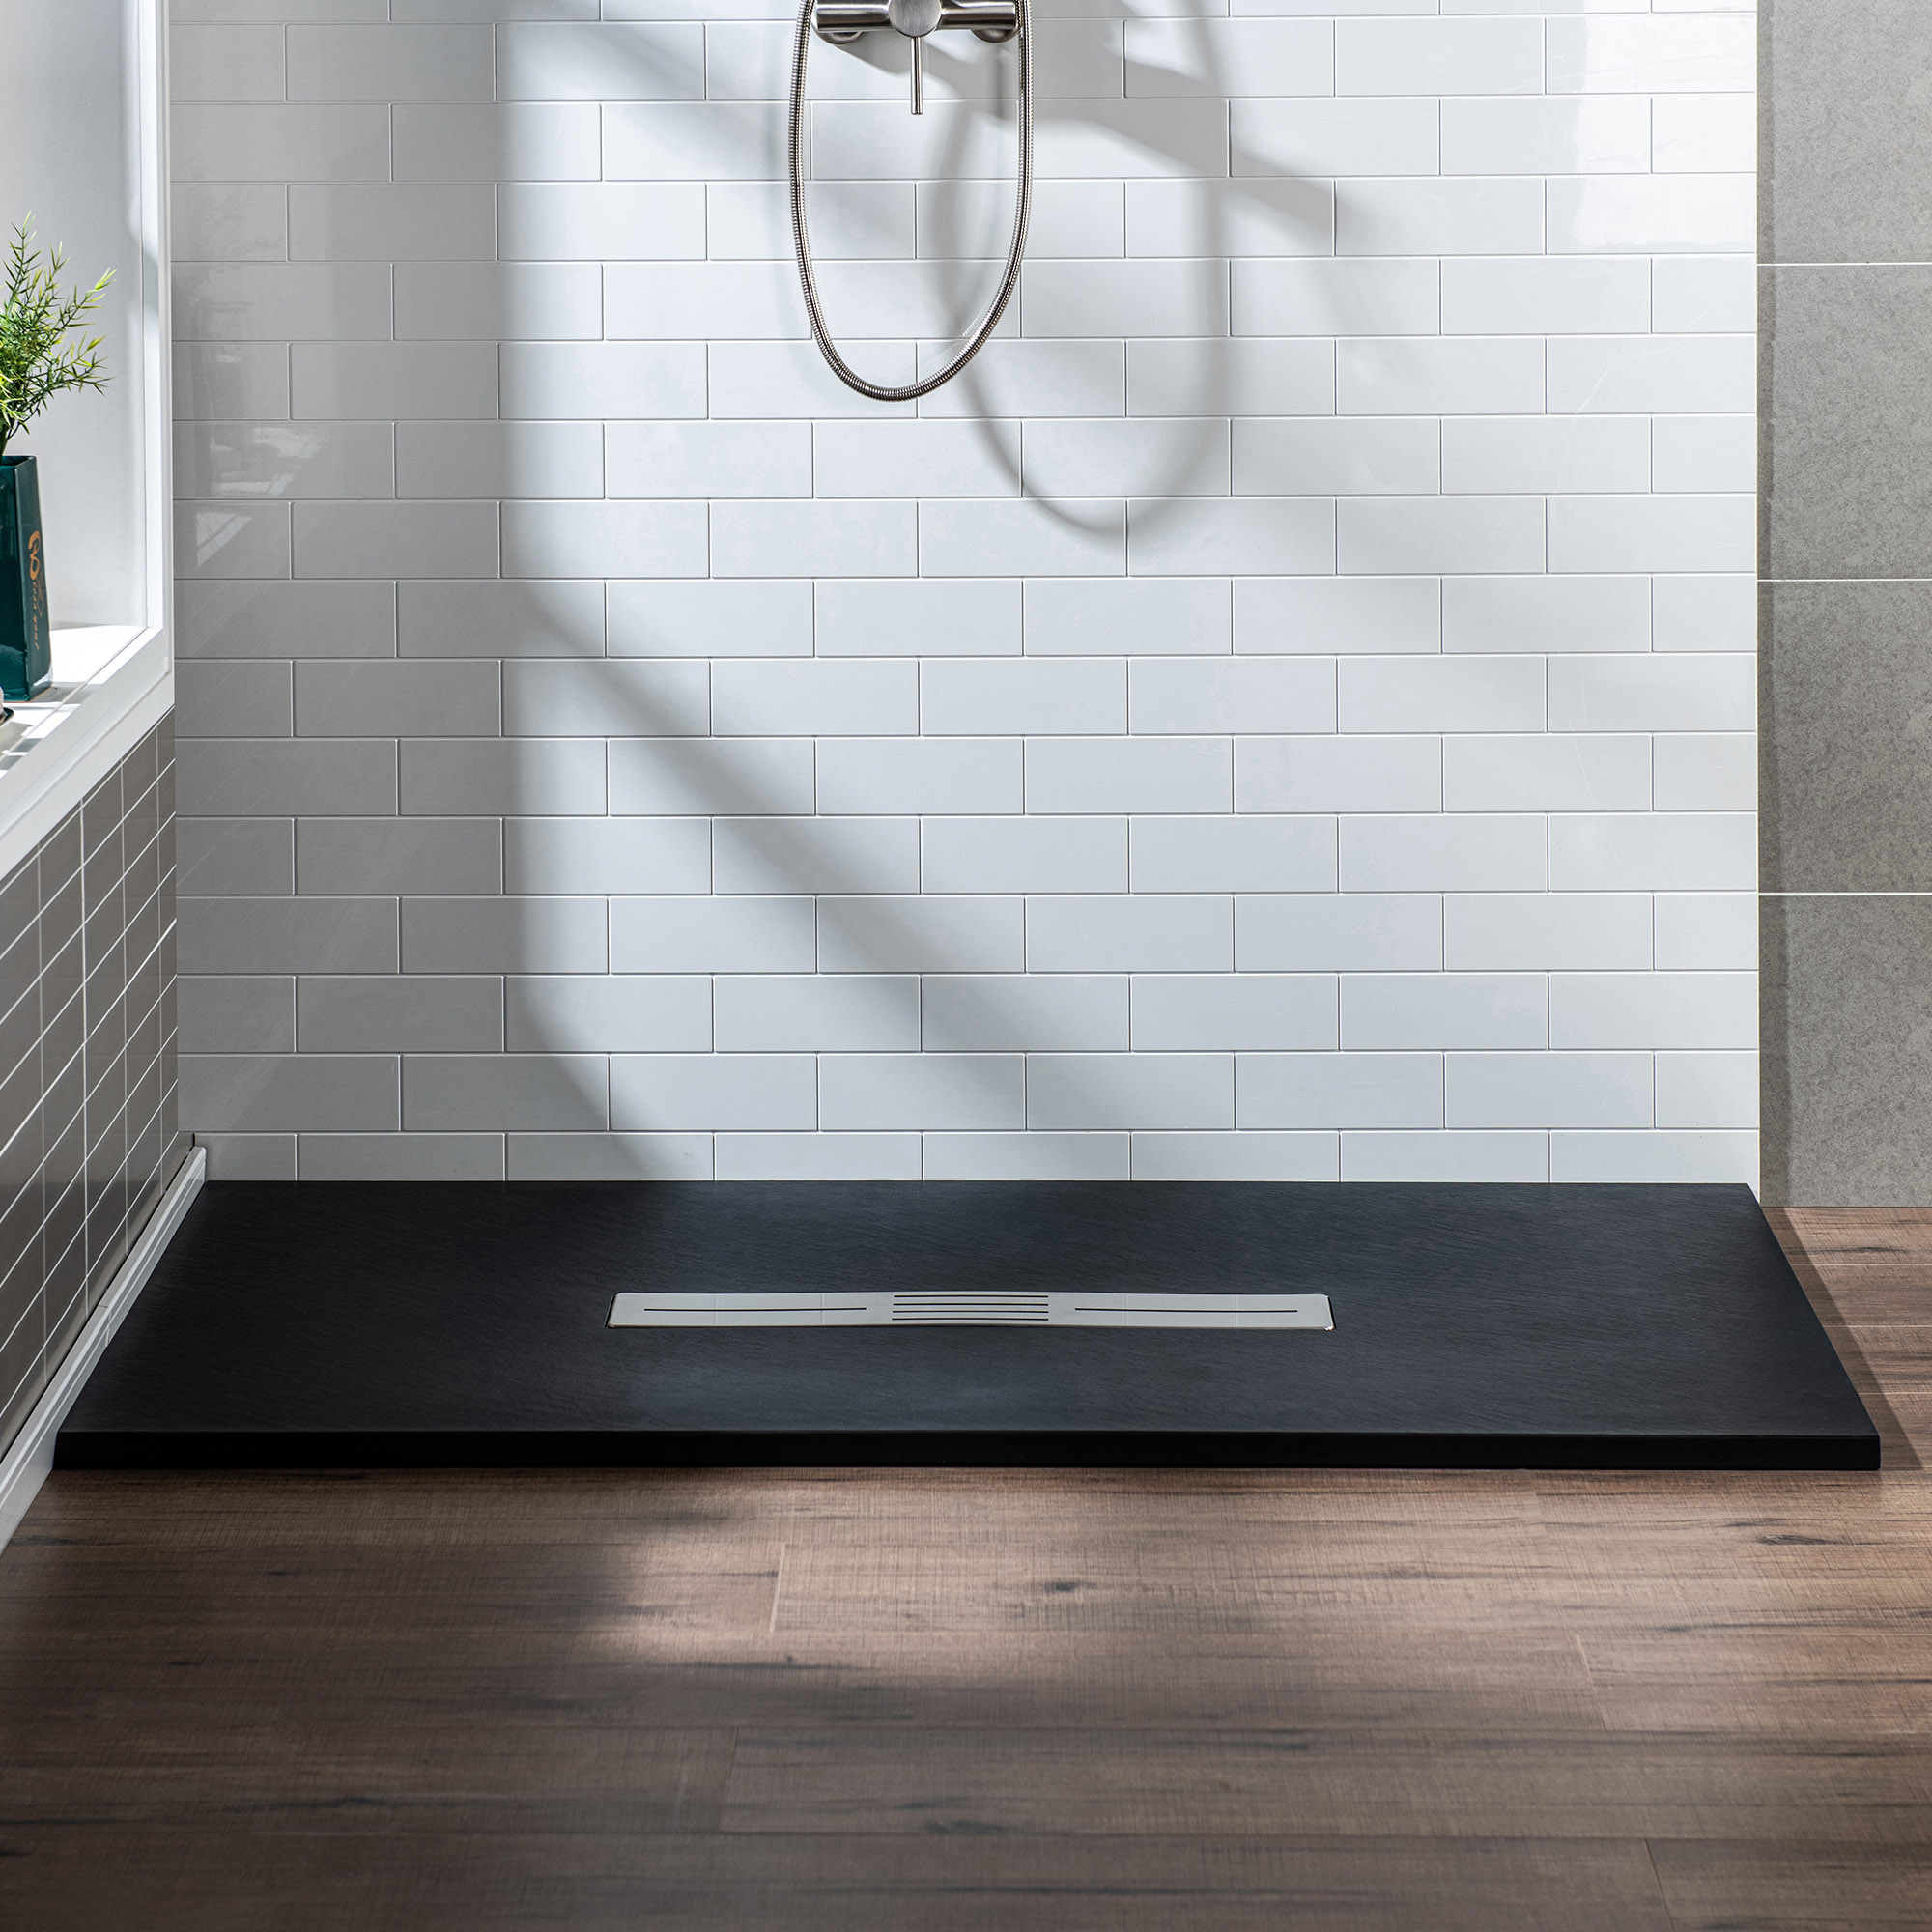  WOODBRIDGE 60-in L x 36-in W Zero Threshold End Drain Shower Base with Center Drain Placement, Matching Decorative Drain Plate and Tile Flange, Wheel Chair Access, Low Profile, Black_12571